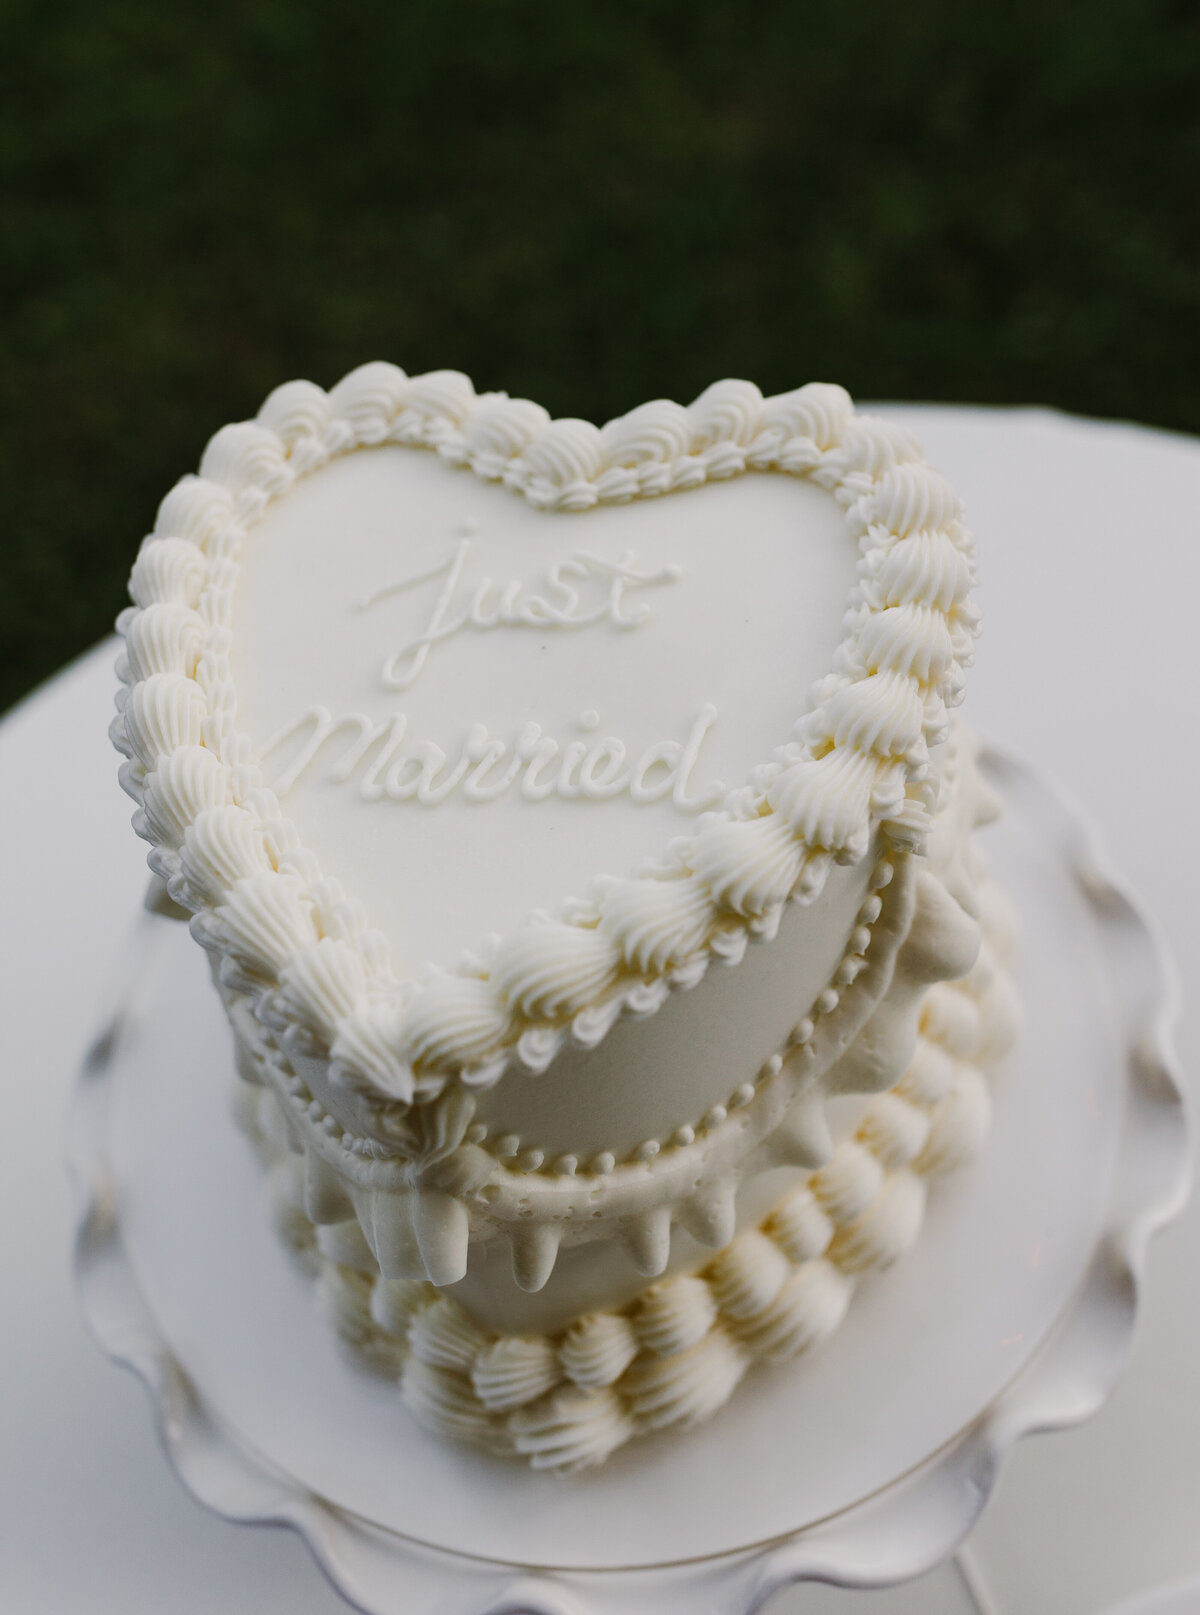 Heart shape cake saying just married